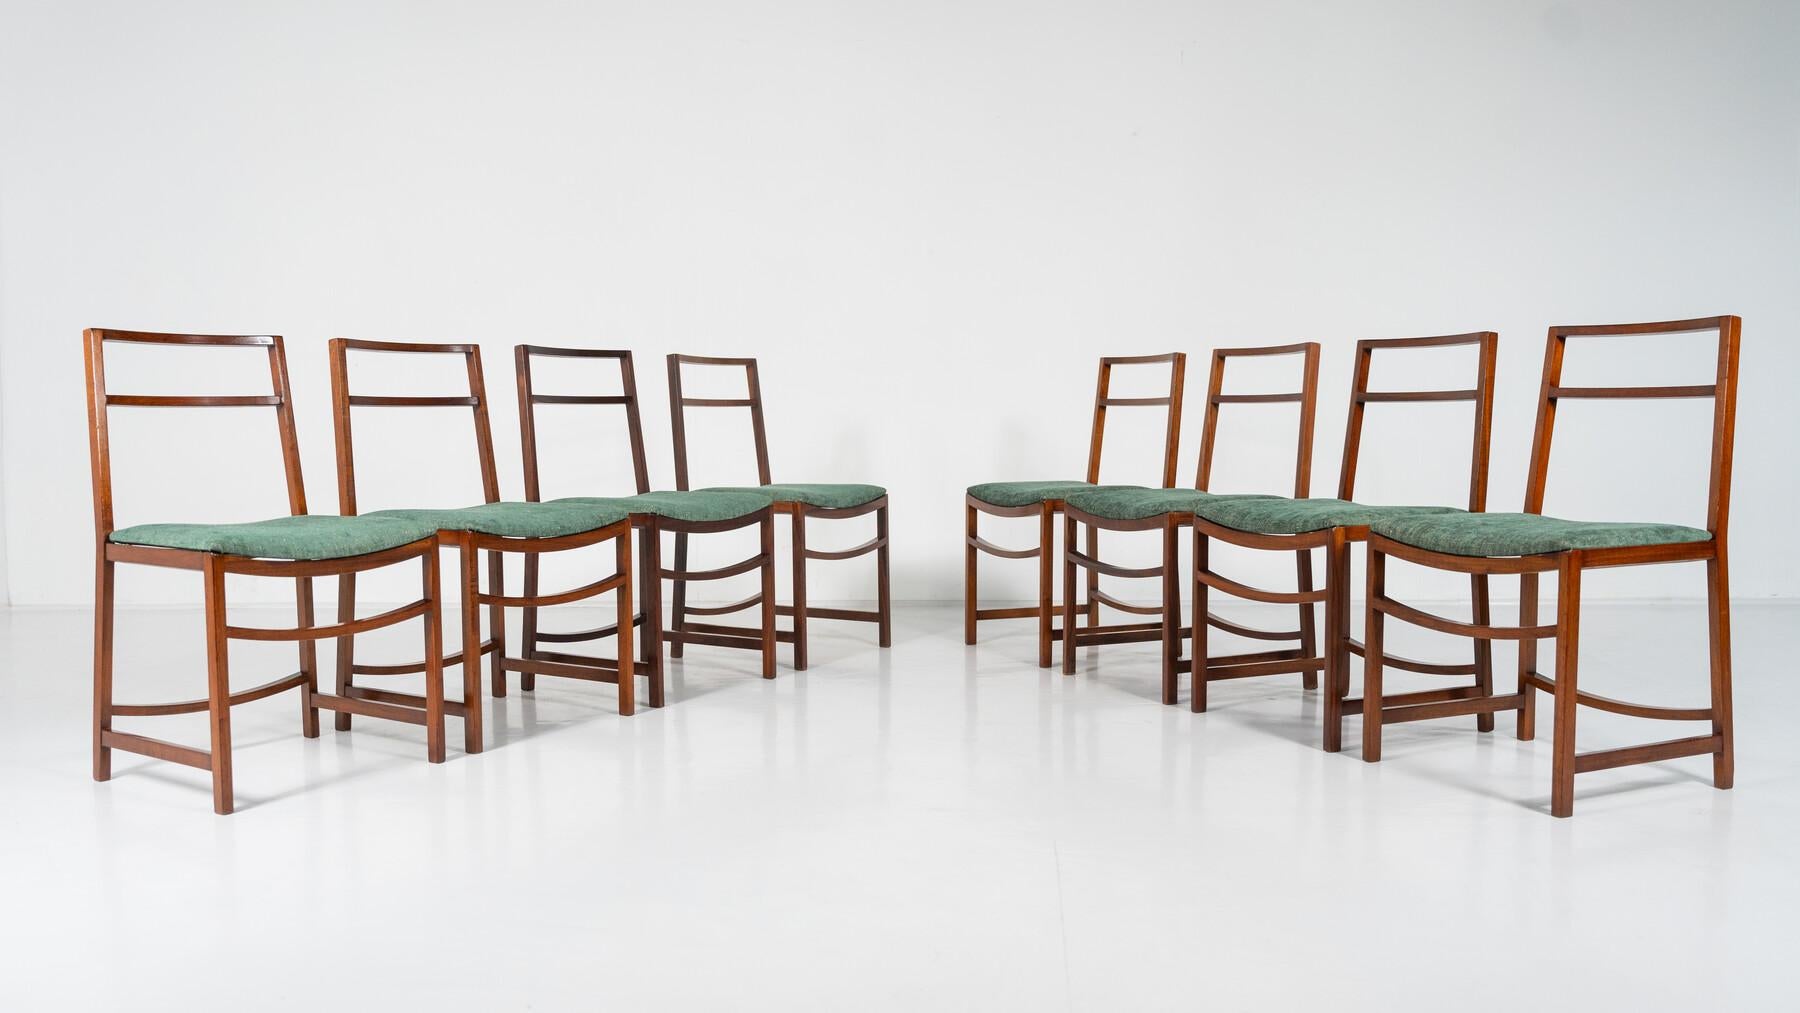 Set of 8 Mid-Century Modern Dining Chairs by Renato Venturi for MIM, 1950s For Sale 1